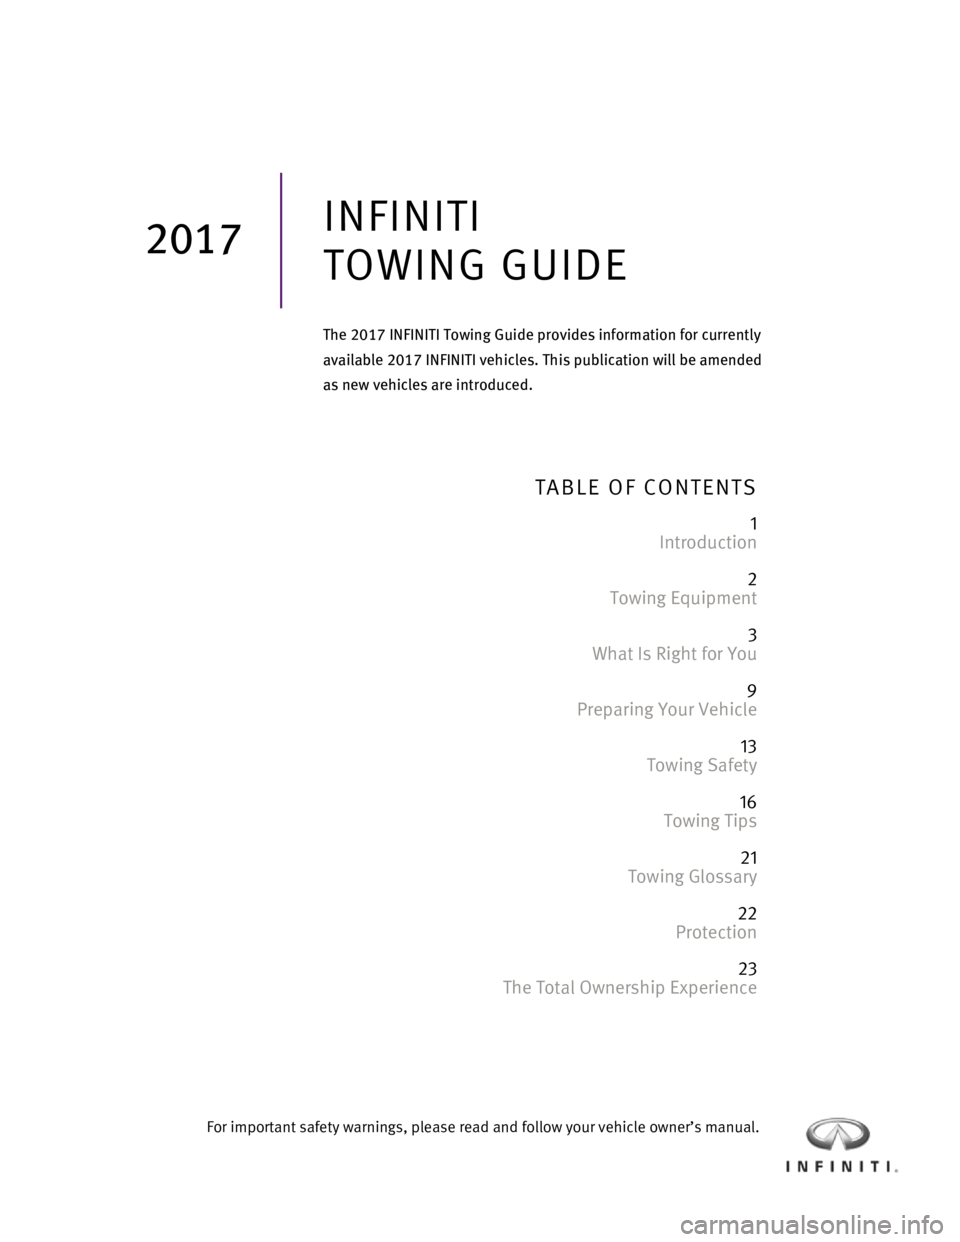 INFINITI Q70 2017  Towing Guide   
 
 
 
 
 
 
 
 
 
TABLE OF CONTENTS  
 
1 
Introduction 
 
2 
Towing Equipment 
 
3 
What Is Right for You 
 
9 
Preparing Your Vehicle 
 
13 
Towing Safety 
 
16 
Towing Tips 
 
21 
Towing Glossar